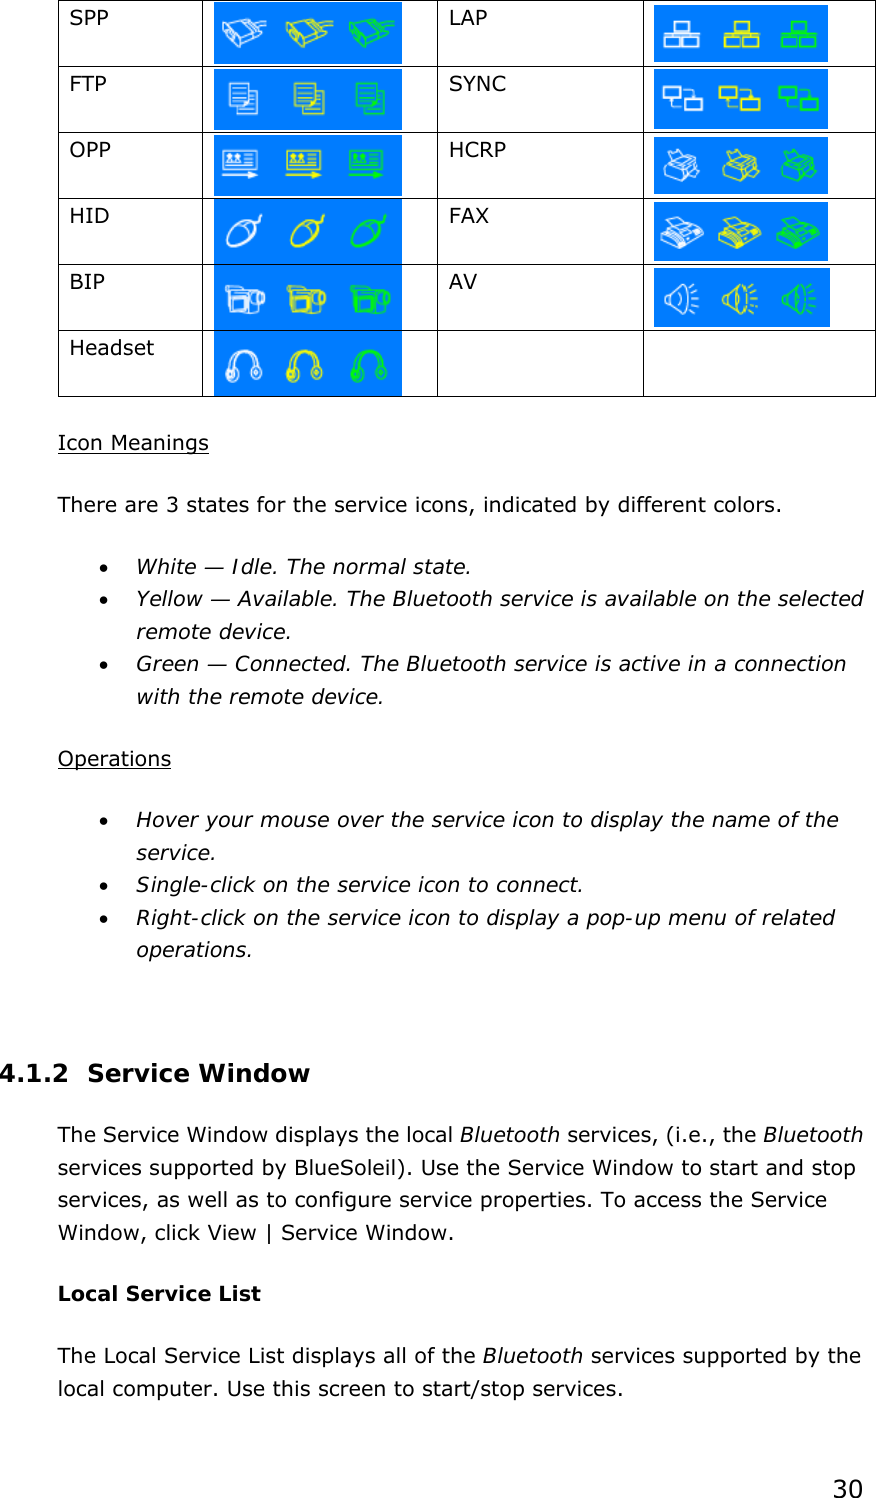 30 SPP    LAP  FTP    SYNC     OPP    HCRP  HID    FAX    BIP    AV    Headset    Icon Meanings There are 3 states for the service icons, indicated by different colors. • White — Idle. The normal state. • Yellow — Available. The Bluetooth service is available on the selected remote device. • Green — Connected. The Bluetooth service is active in a connection with the remote device.  Operations • Hover your mouse over the service icon to display the name of the service. • Single-click on the service icon to connect. • Right-click on the service icon to display a pop-up menu of related operations.  4.1.2 Service Window The Service Window displays the local Bluetooth services, (i.e., the Bluetooth services supported by BlueSoleil). Use the Service Window to start and stop services, as well as to configure service properties. To access the Service Window, click View | Service Window. Local Service List The Local Service List displays all of the Bluetooth services supported by the local computer. Use this screen to start/stop services. 